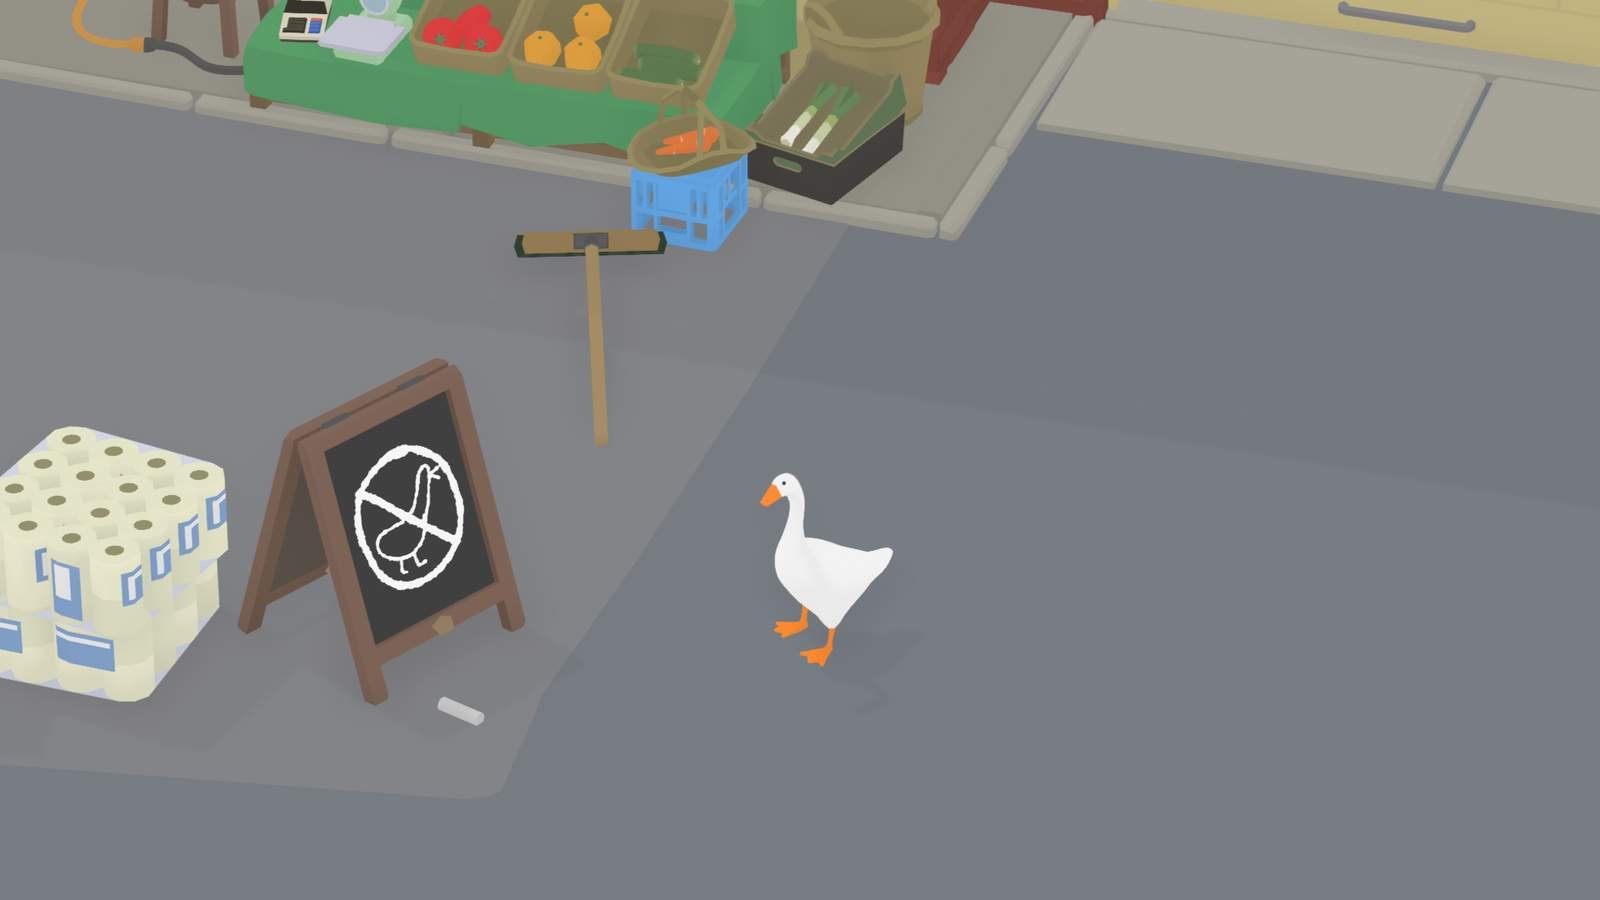 untitled goose game set the table